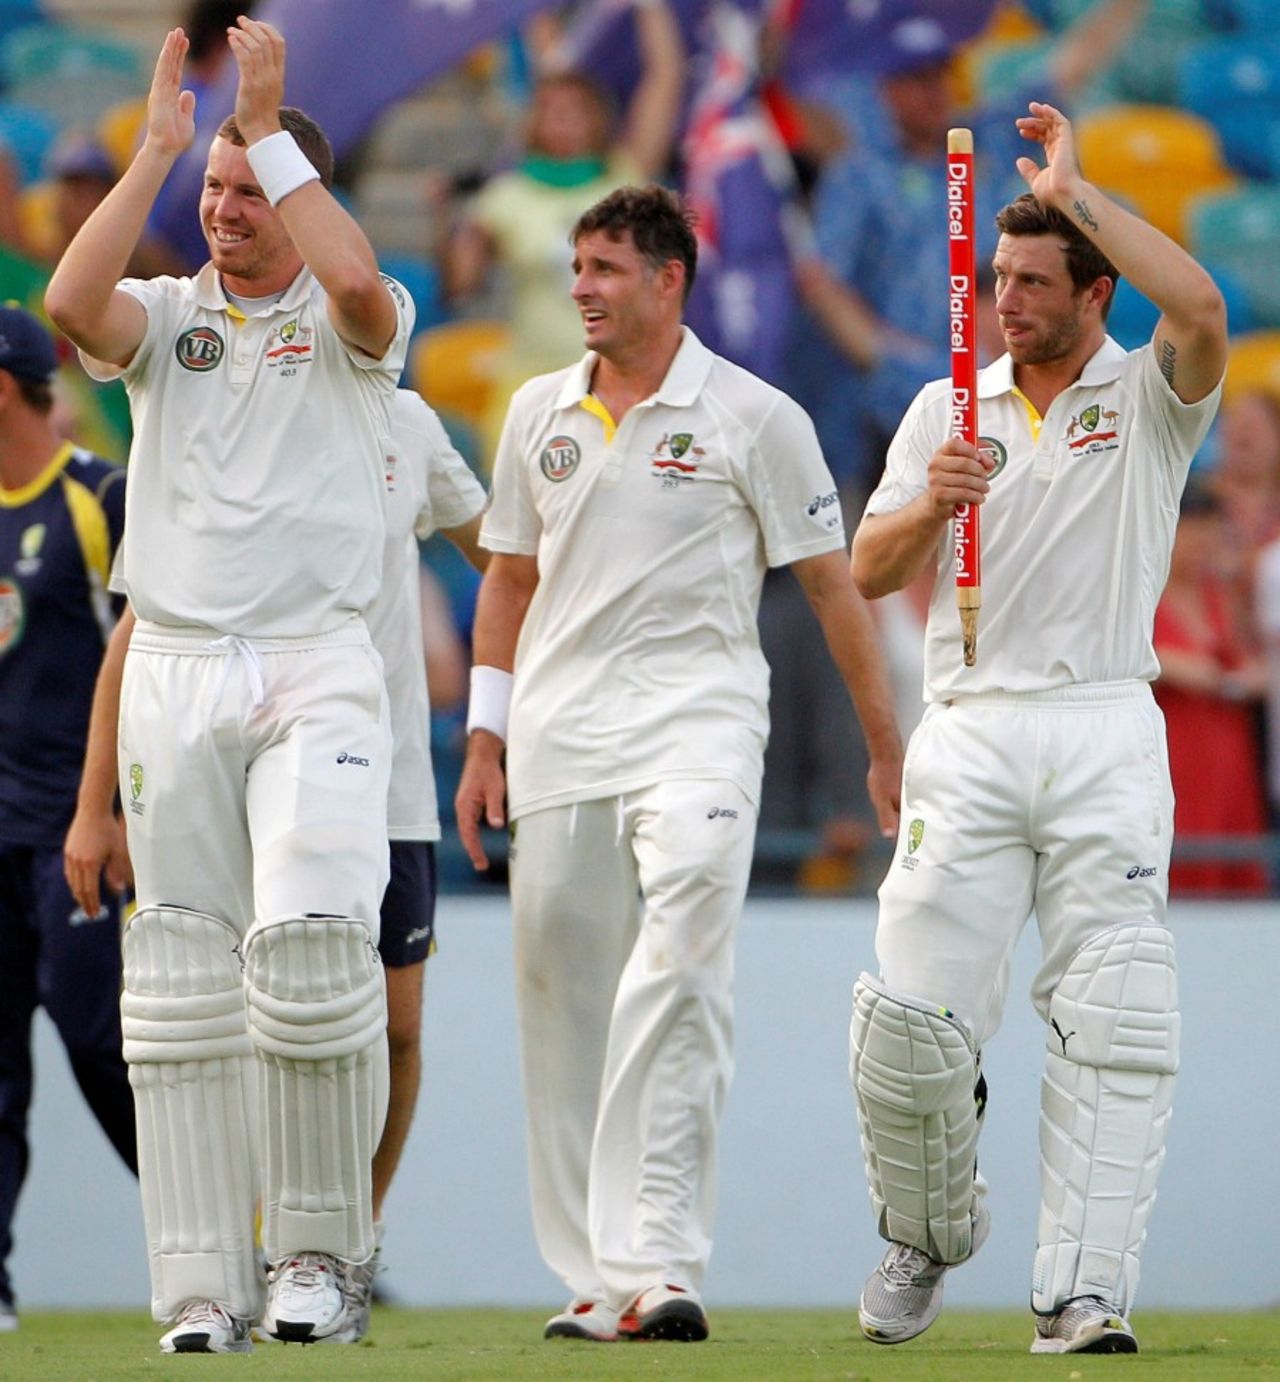 Peter Siddle, Michael Hussey and Matthew Wade acknowledge the crowd after Australia's win, West Indies v Australia, 1st Test, Barbados, 5th day, April 11, 2012